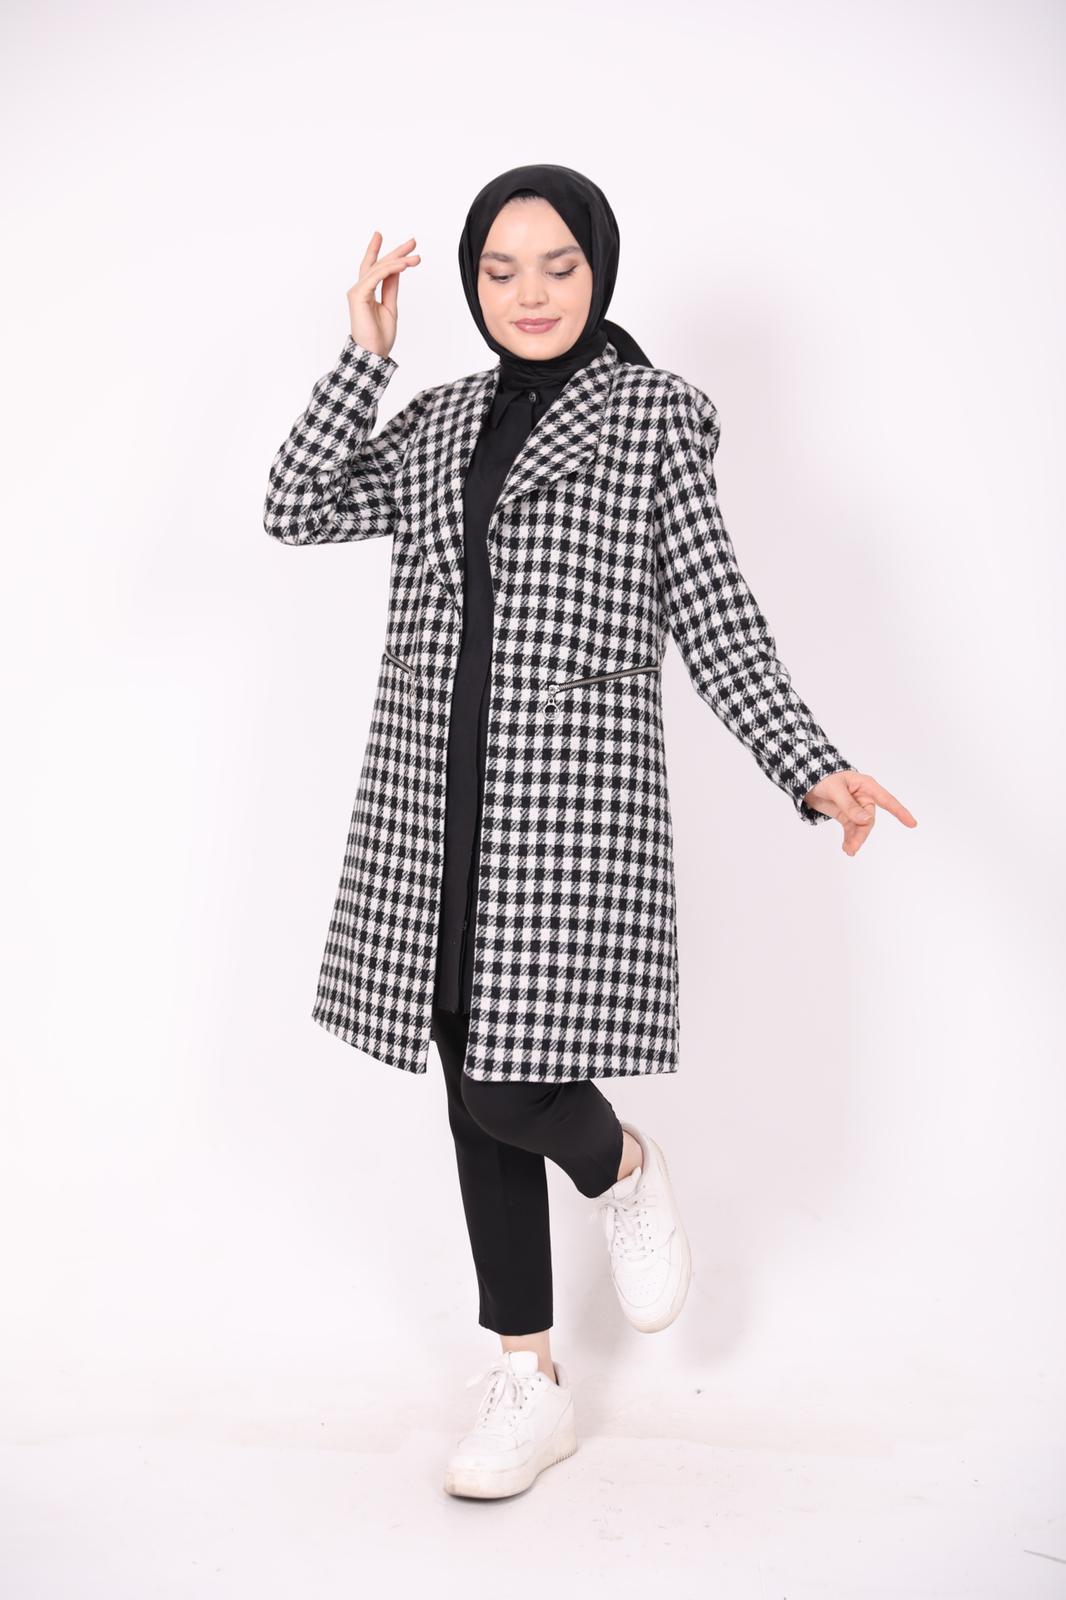 Houndstooth Pattern Coat with Zipper Pockets Black